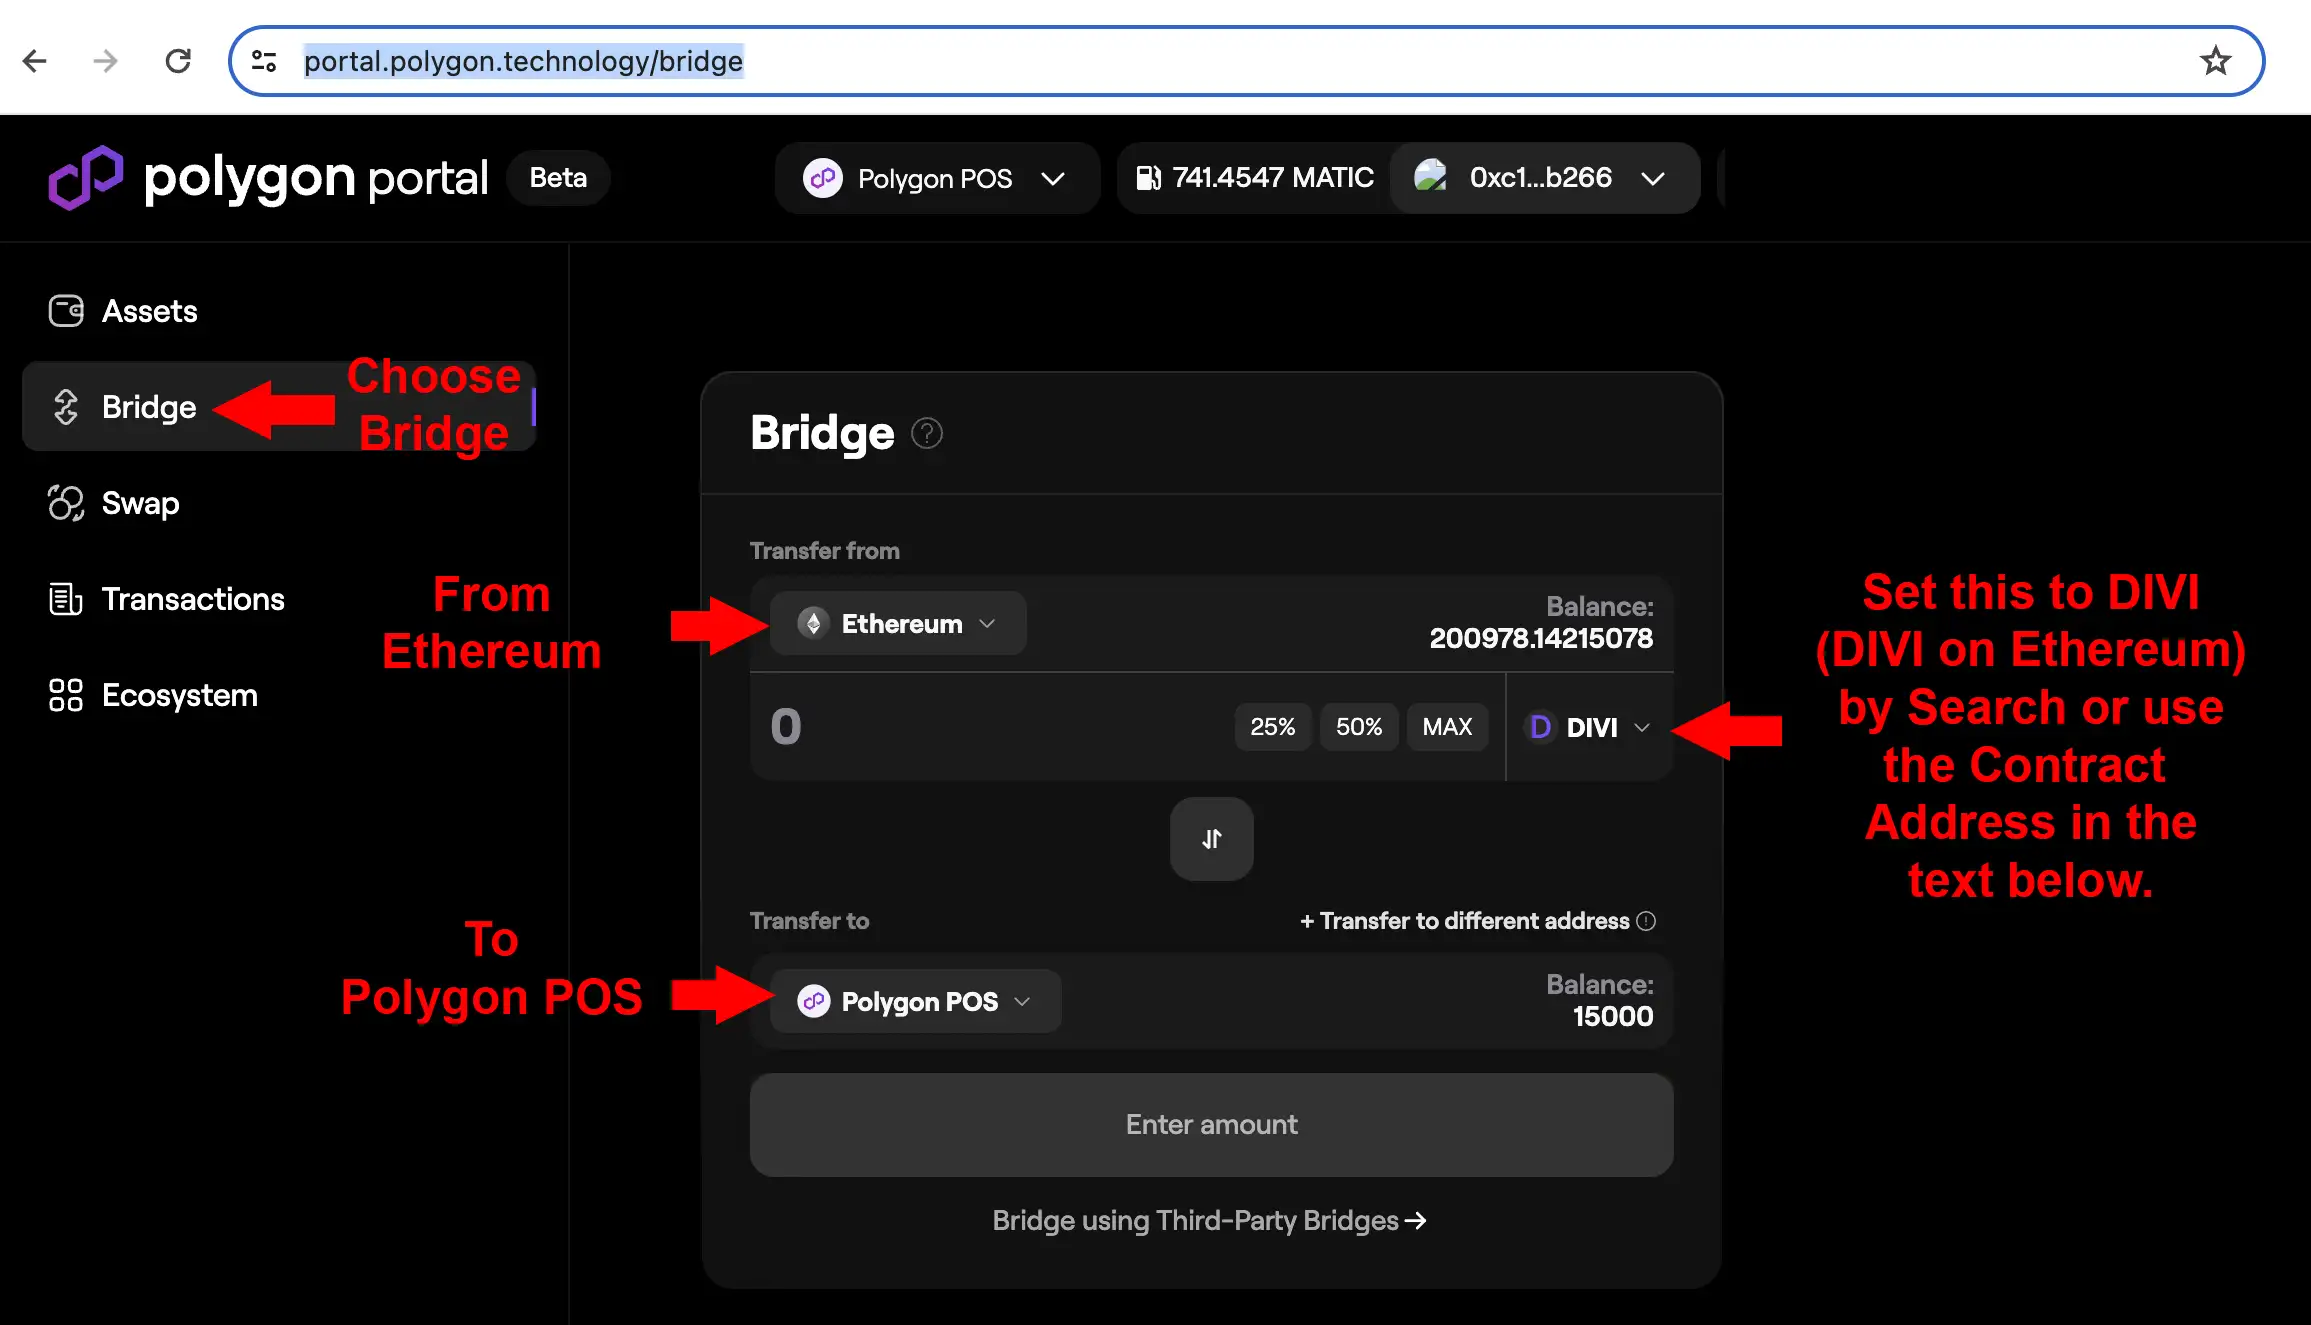 Image of how to use Polygon Portal's Bridge from Ethereum to Polygon network